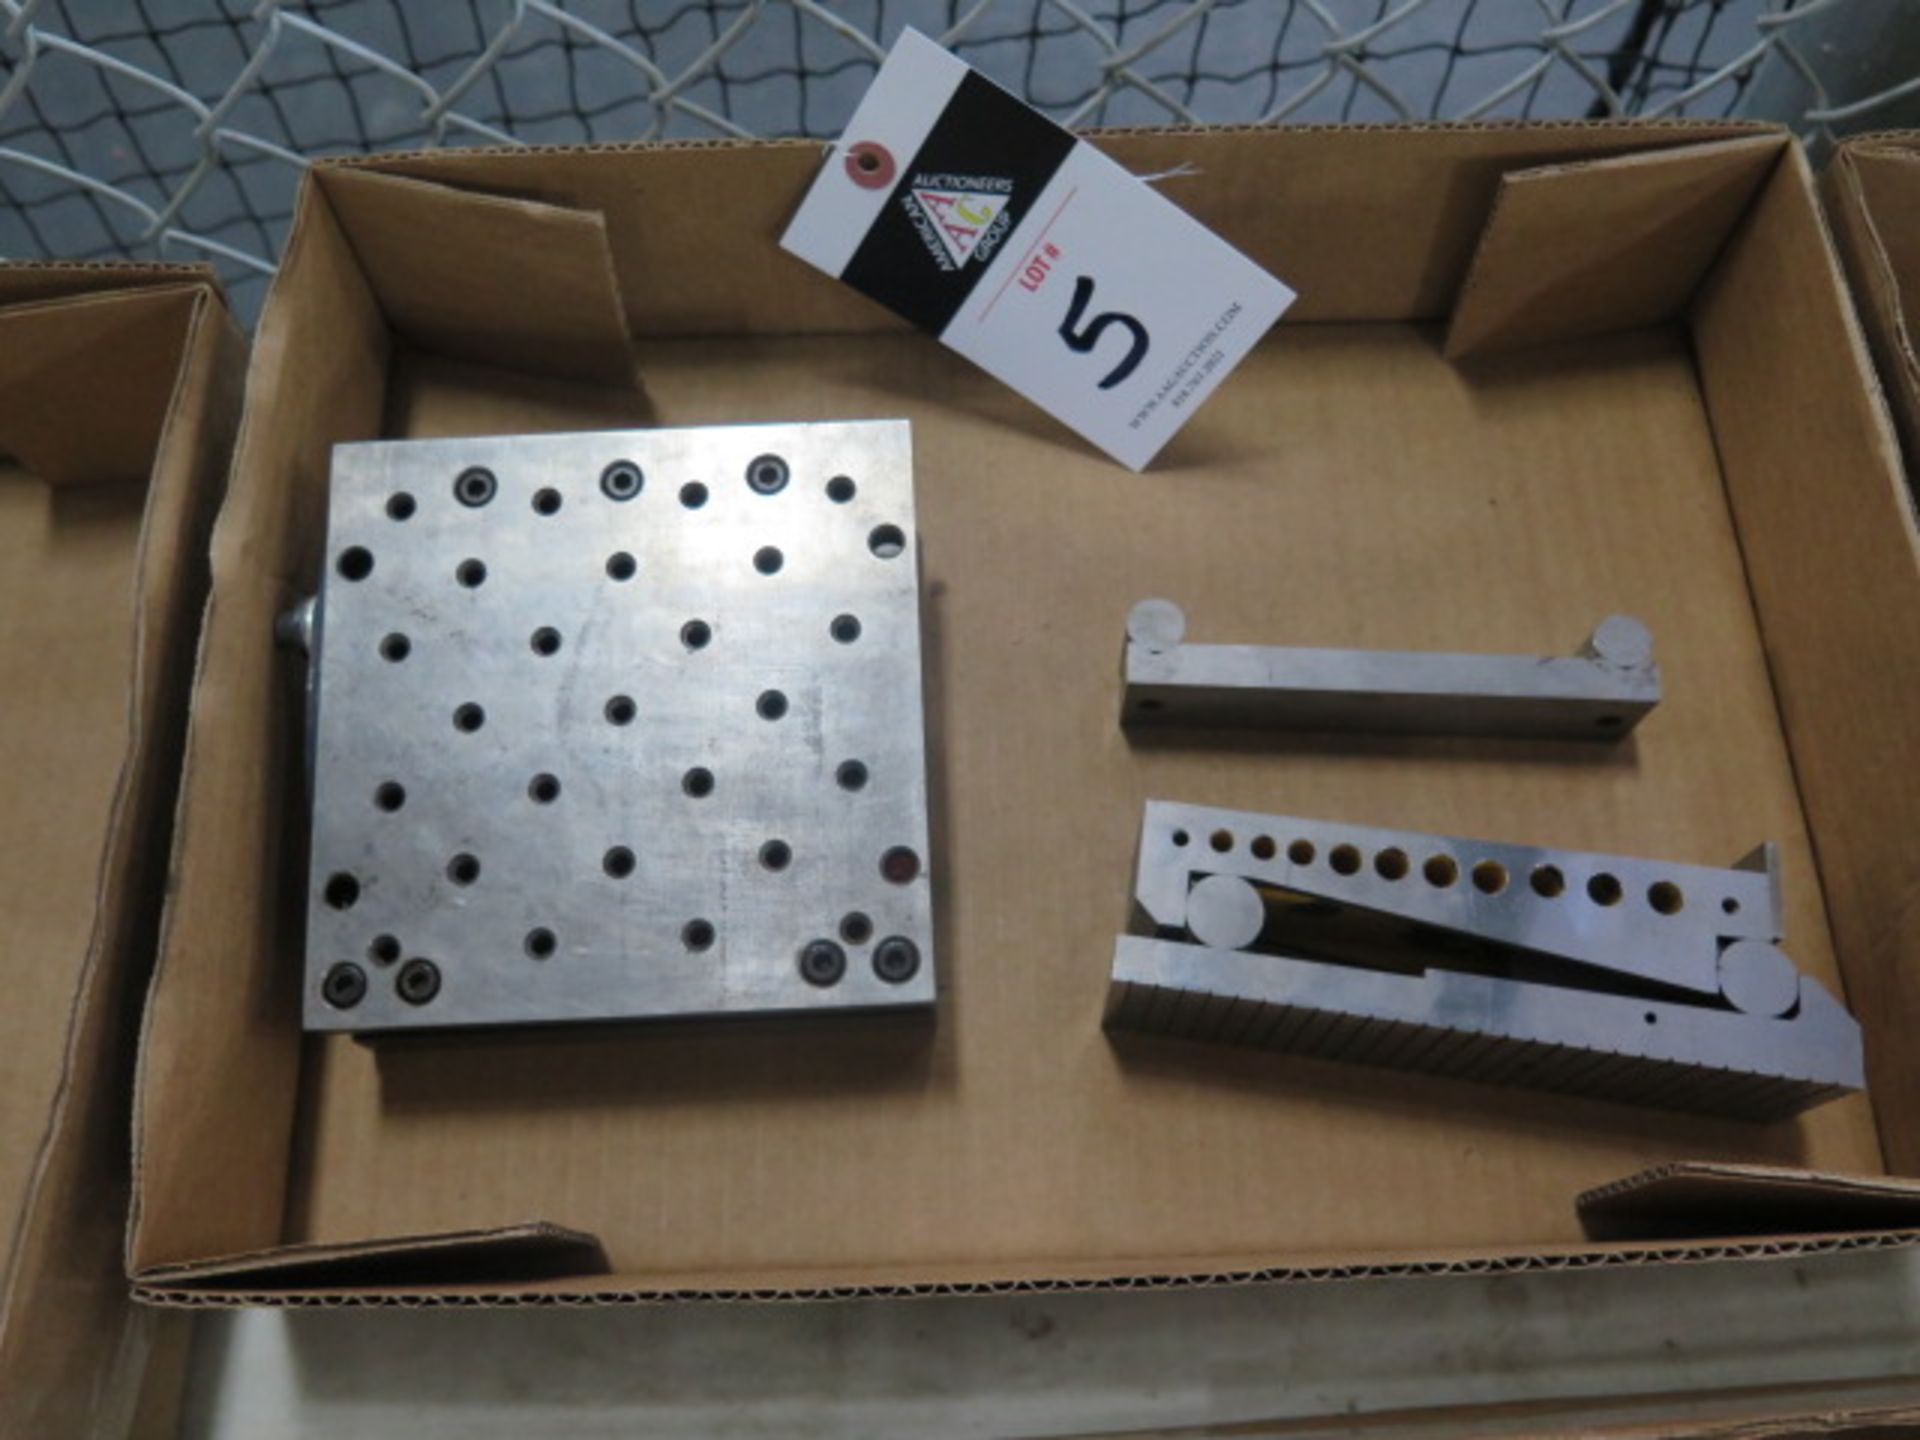 6" x 6" Sine Table, 2" x 7" Sine Table and Sine Bar (SOLD AS-IS - NO WARRANTY)